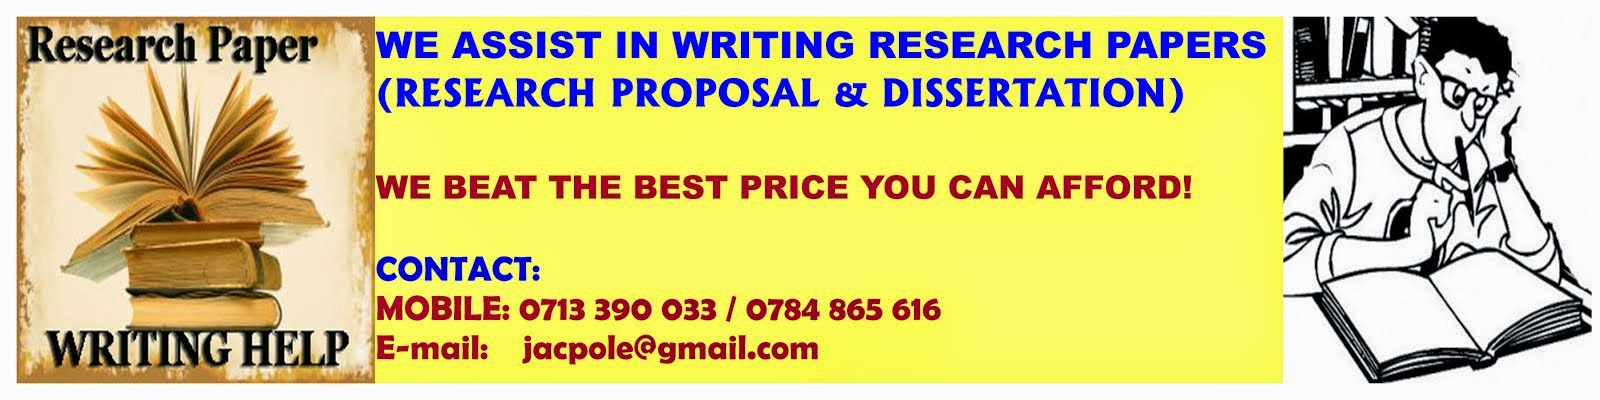 RESEARCH AD